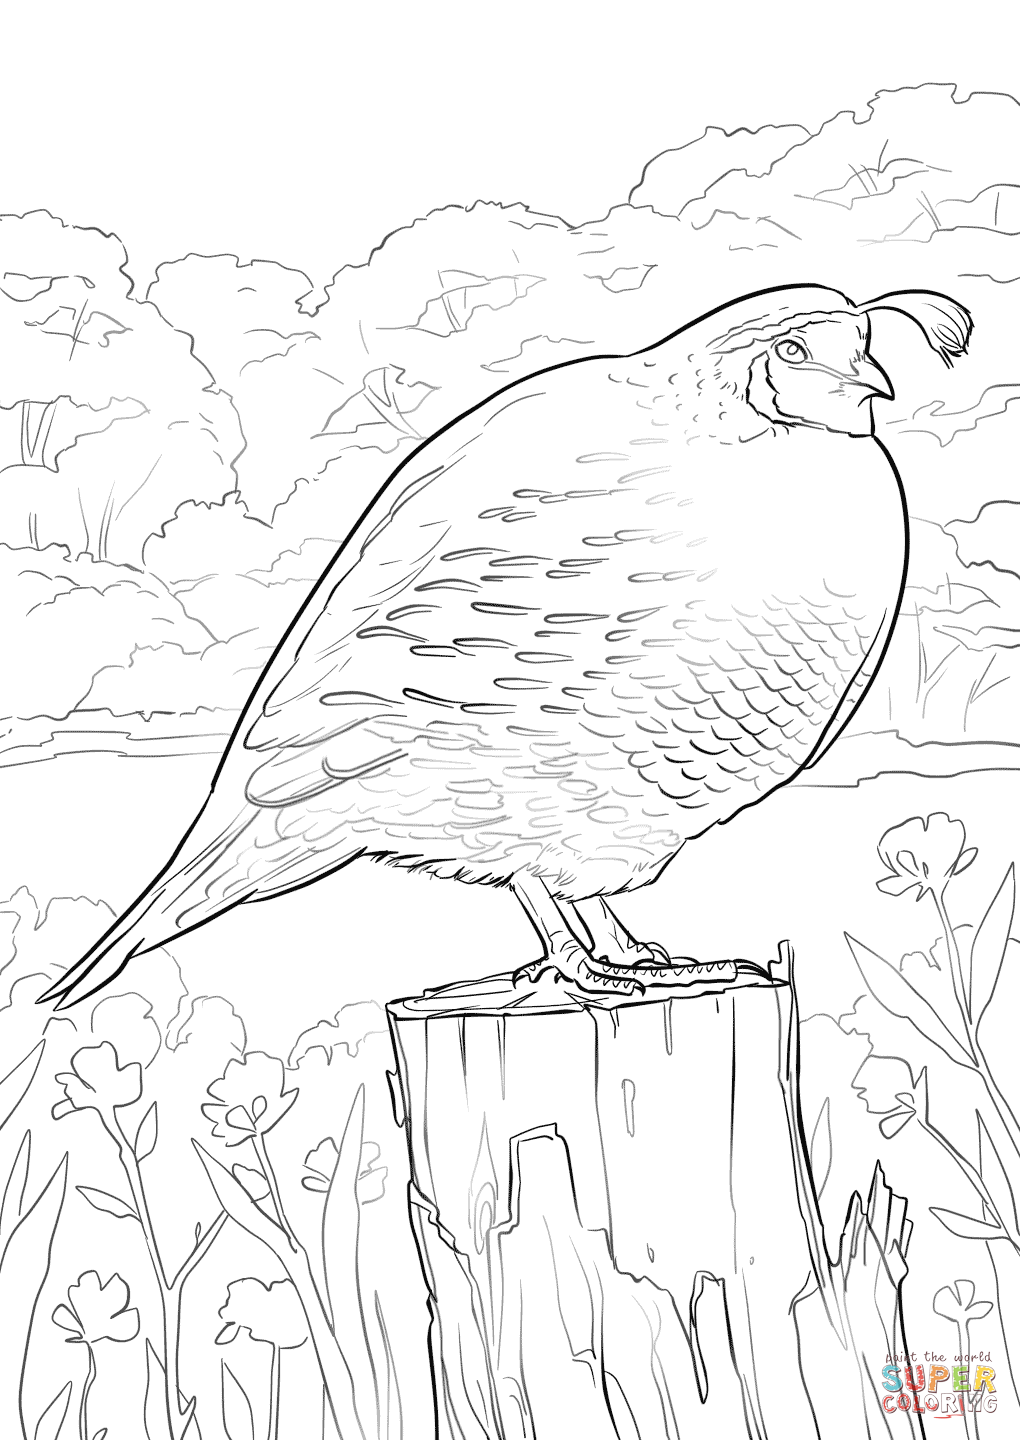 California Quail Coloring Page   Free Printable Coloring Pages ...